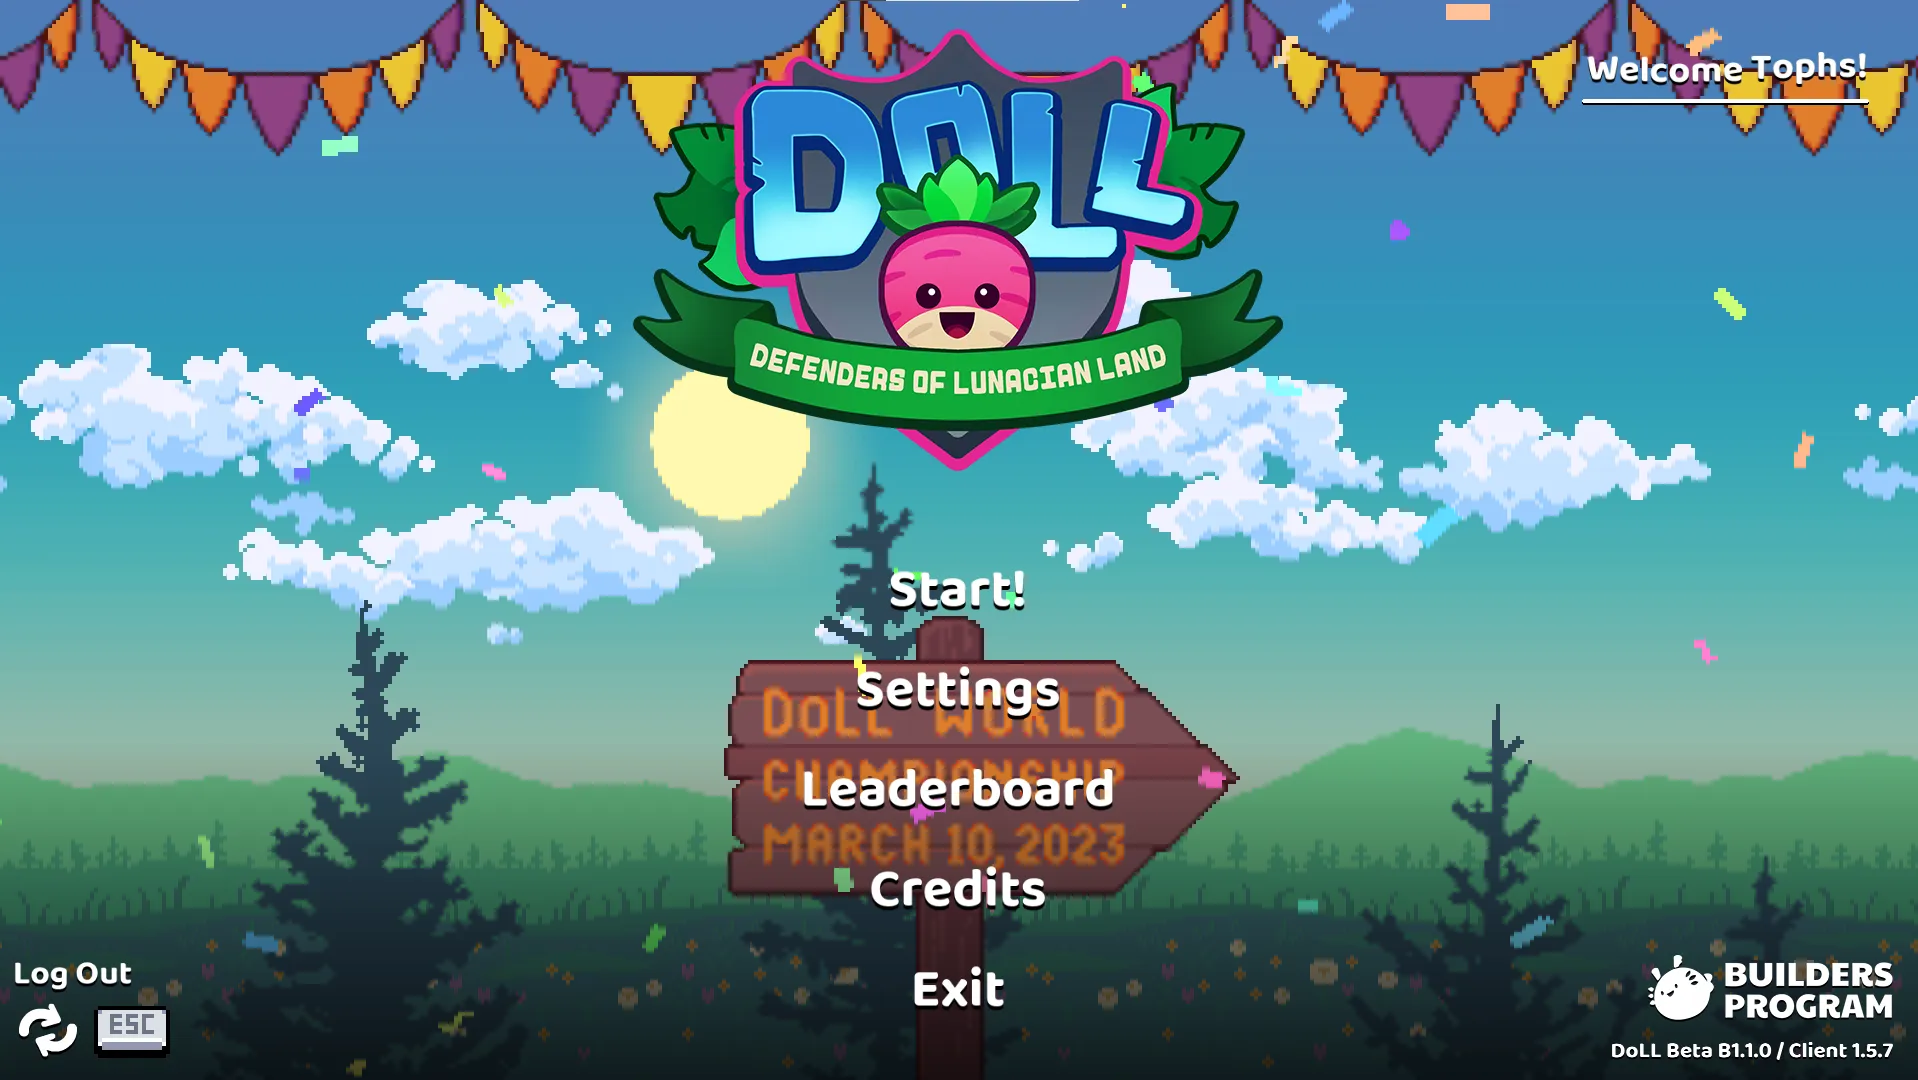 The Defenders of Lunacian Land homescreen serves as the lobby upon opening the game. Players can check their settings, leaderboards, or start playing the game.